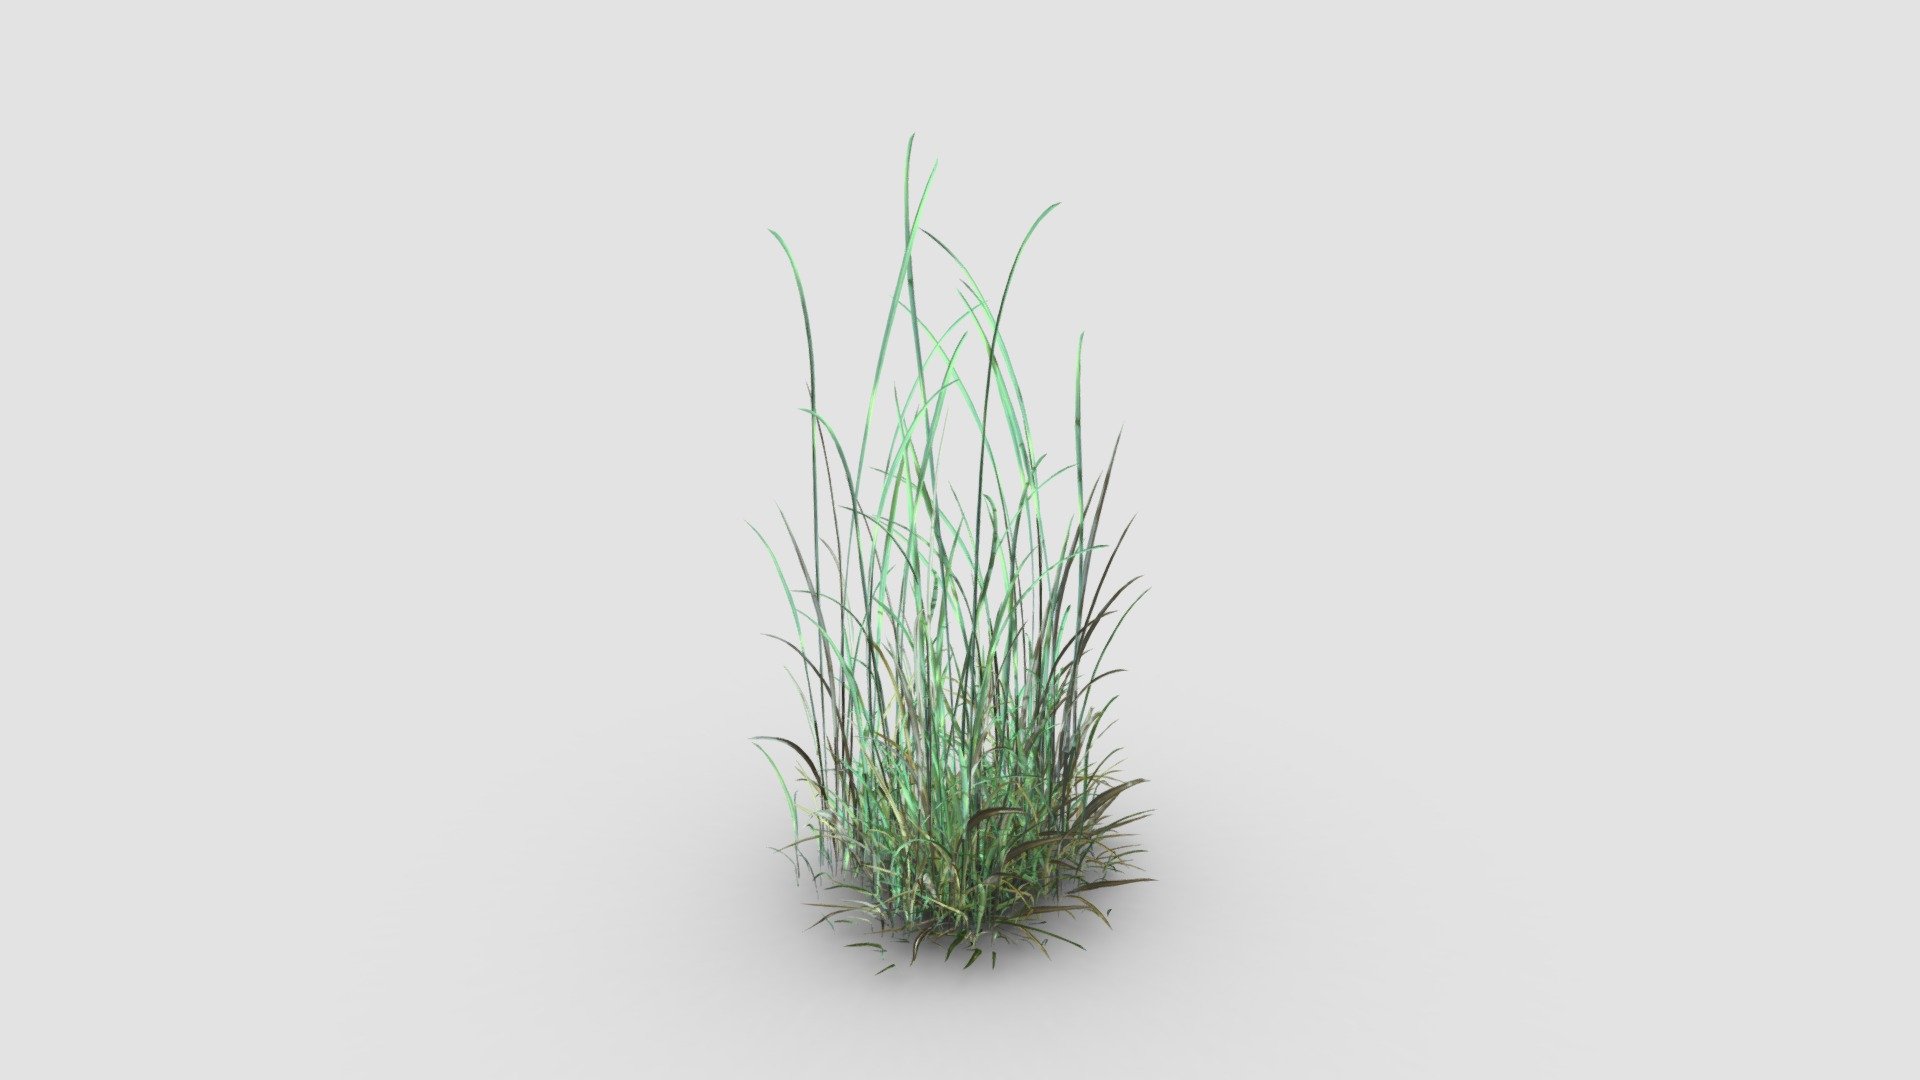 Highly detailed 3d model of plant with all textures, shaders and materials. It is ready to use, just put it into your scene 3d model